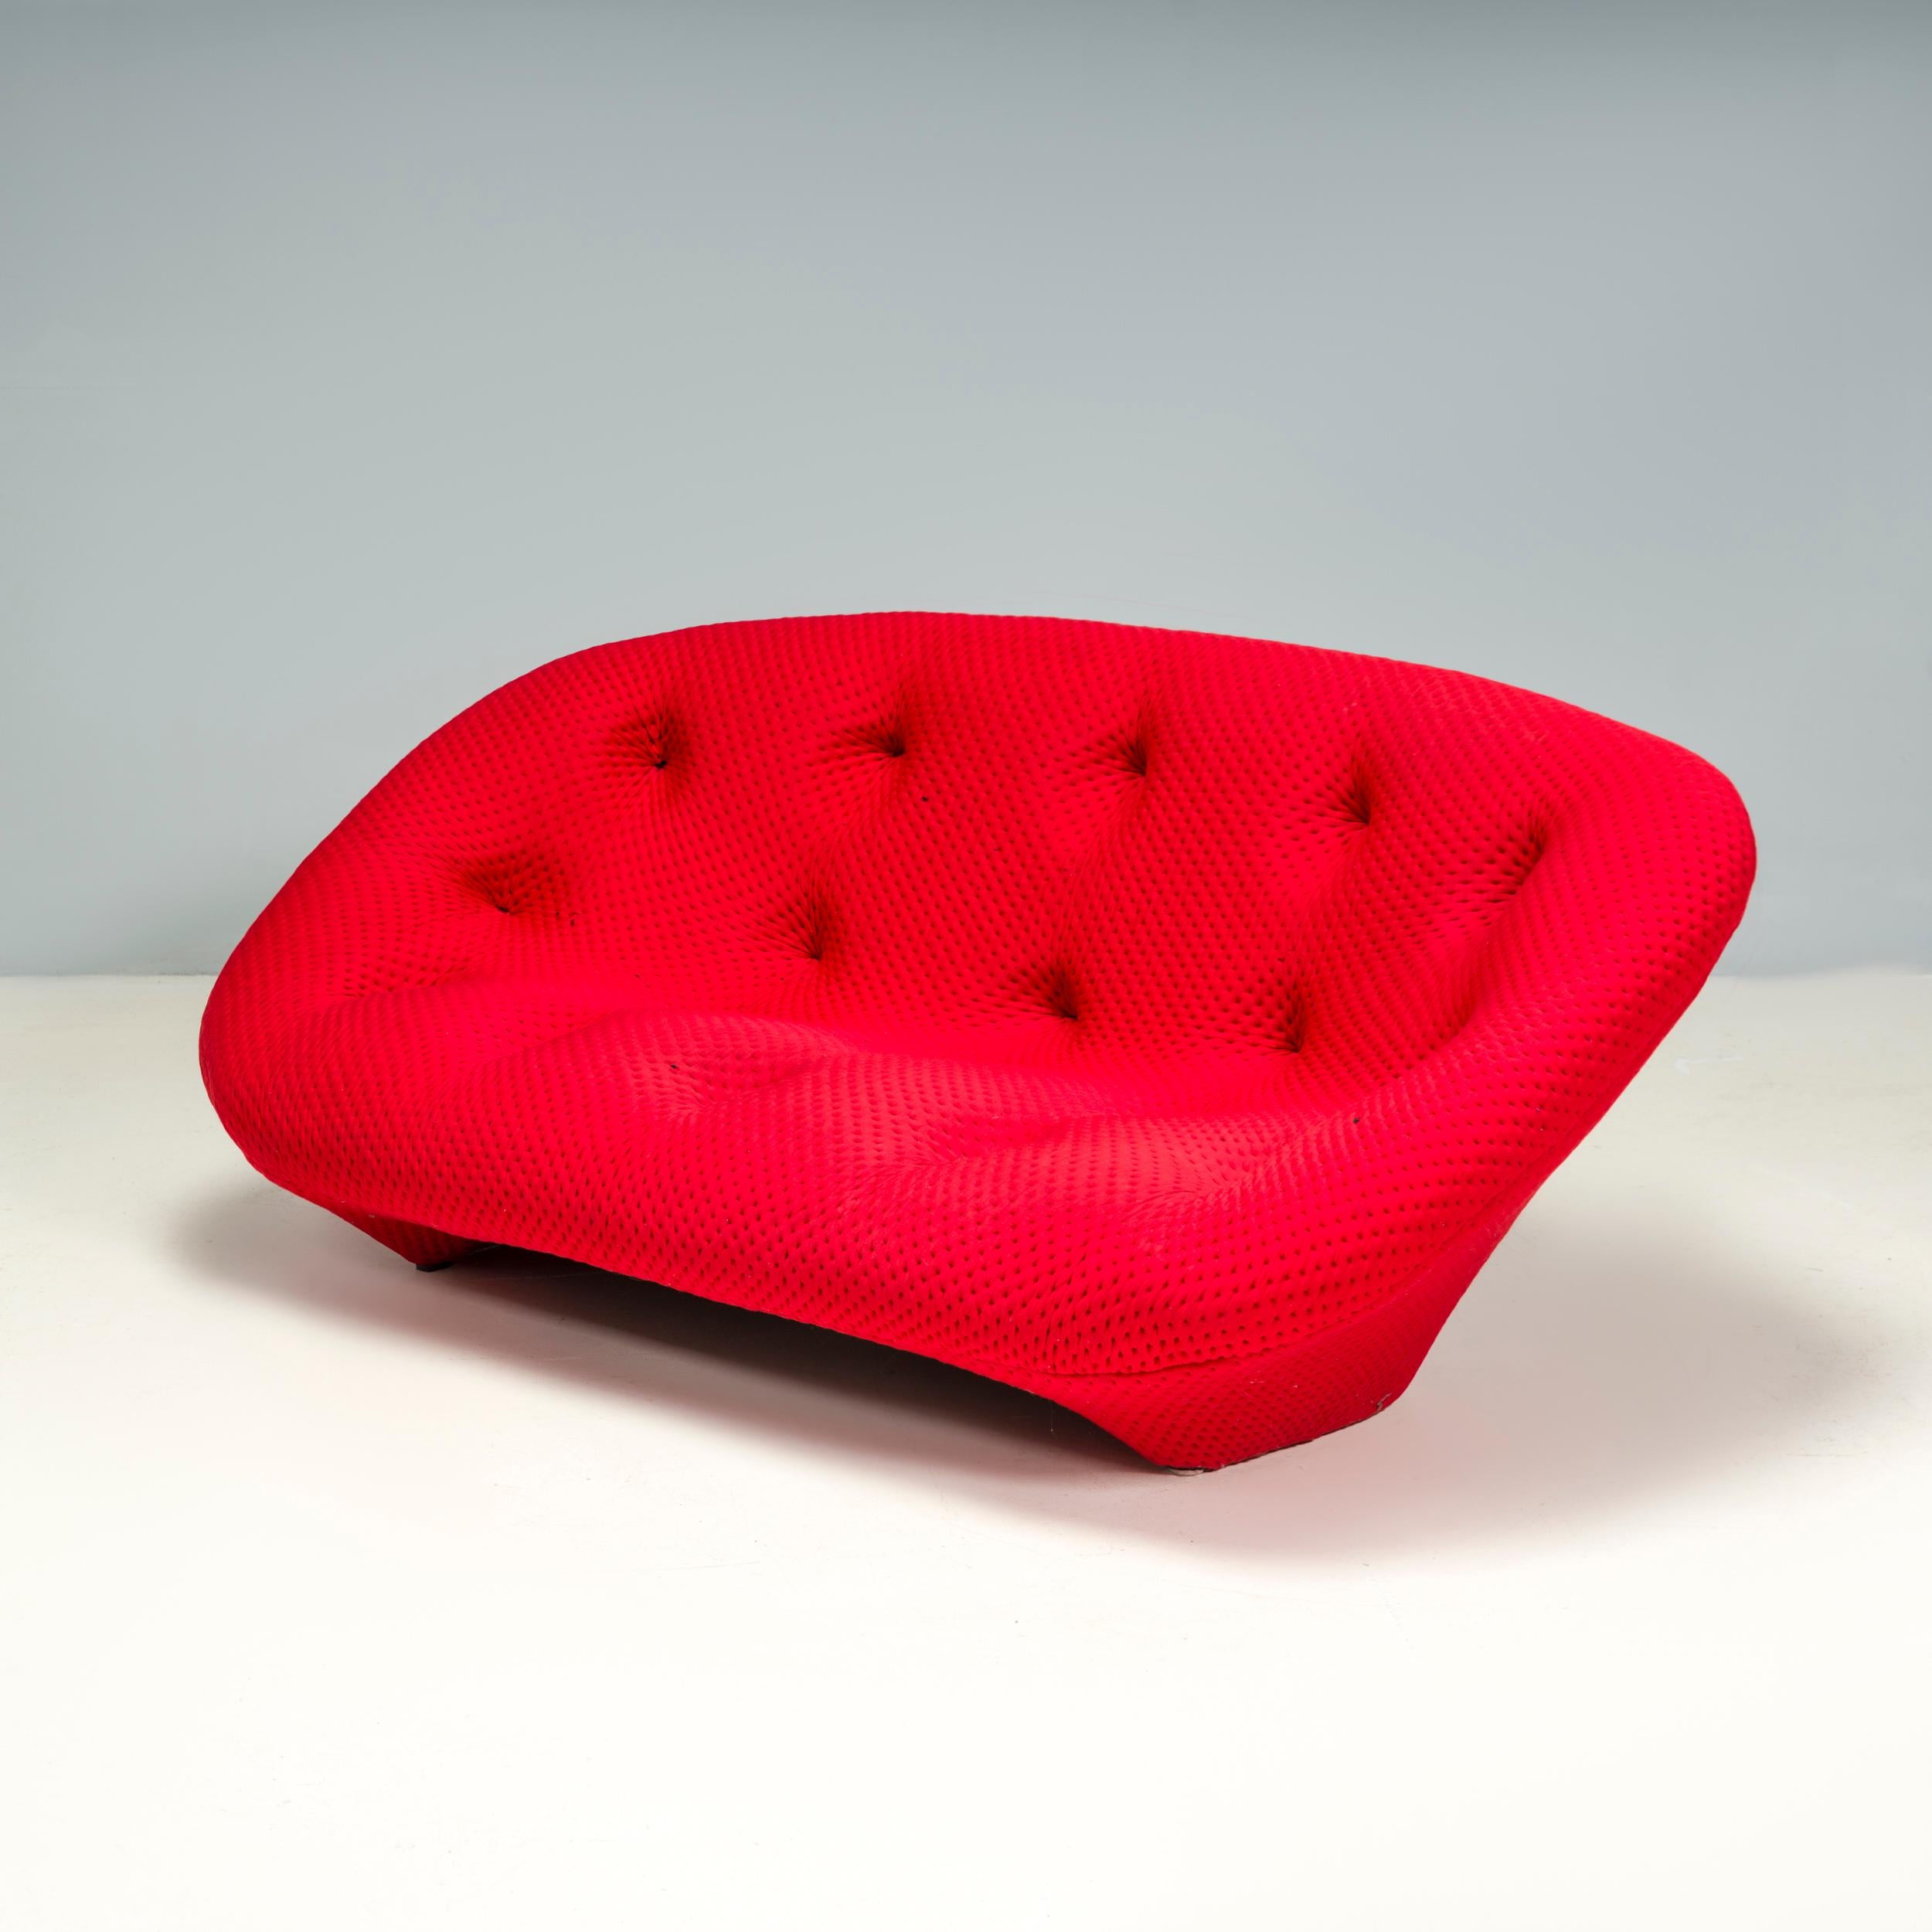 Originally designed by Erwan and Ronan Bouroullec for Ligne Roset in 2011, the Pluom sofa is a fantastic example of modern design. 

The organic shape is formed from tubular steel and wire mesh with layers of foam to ensure the ultimate comfort,